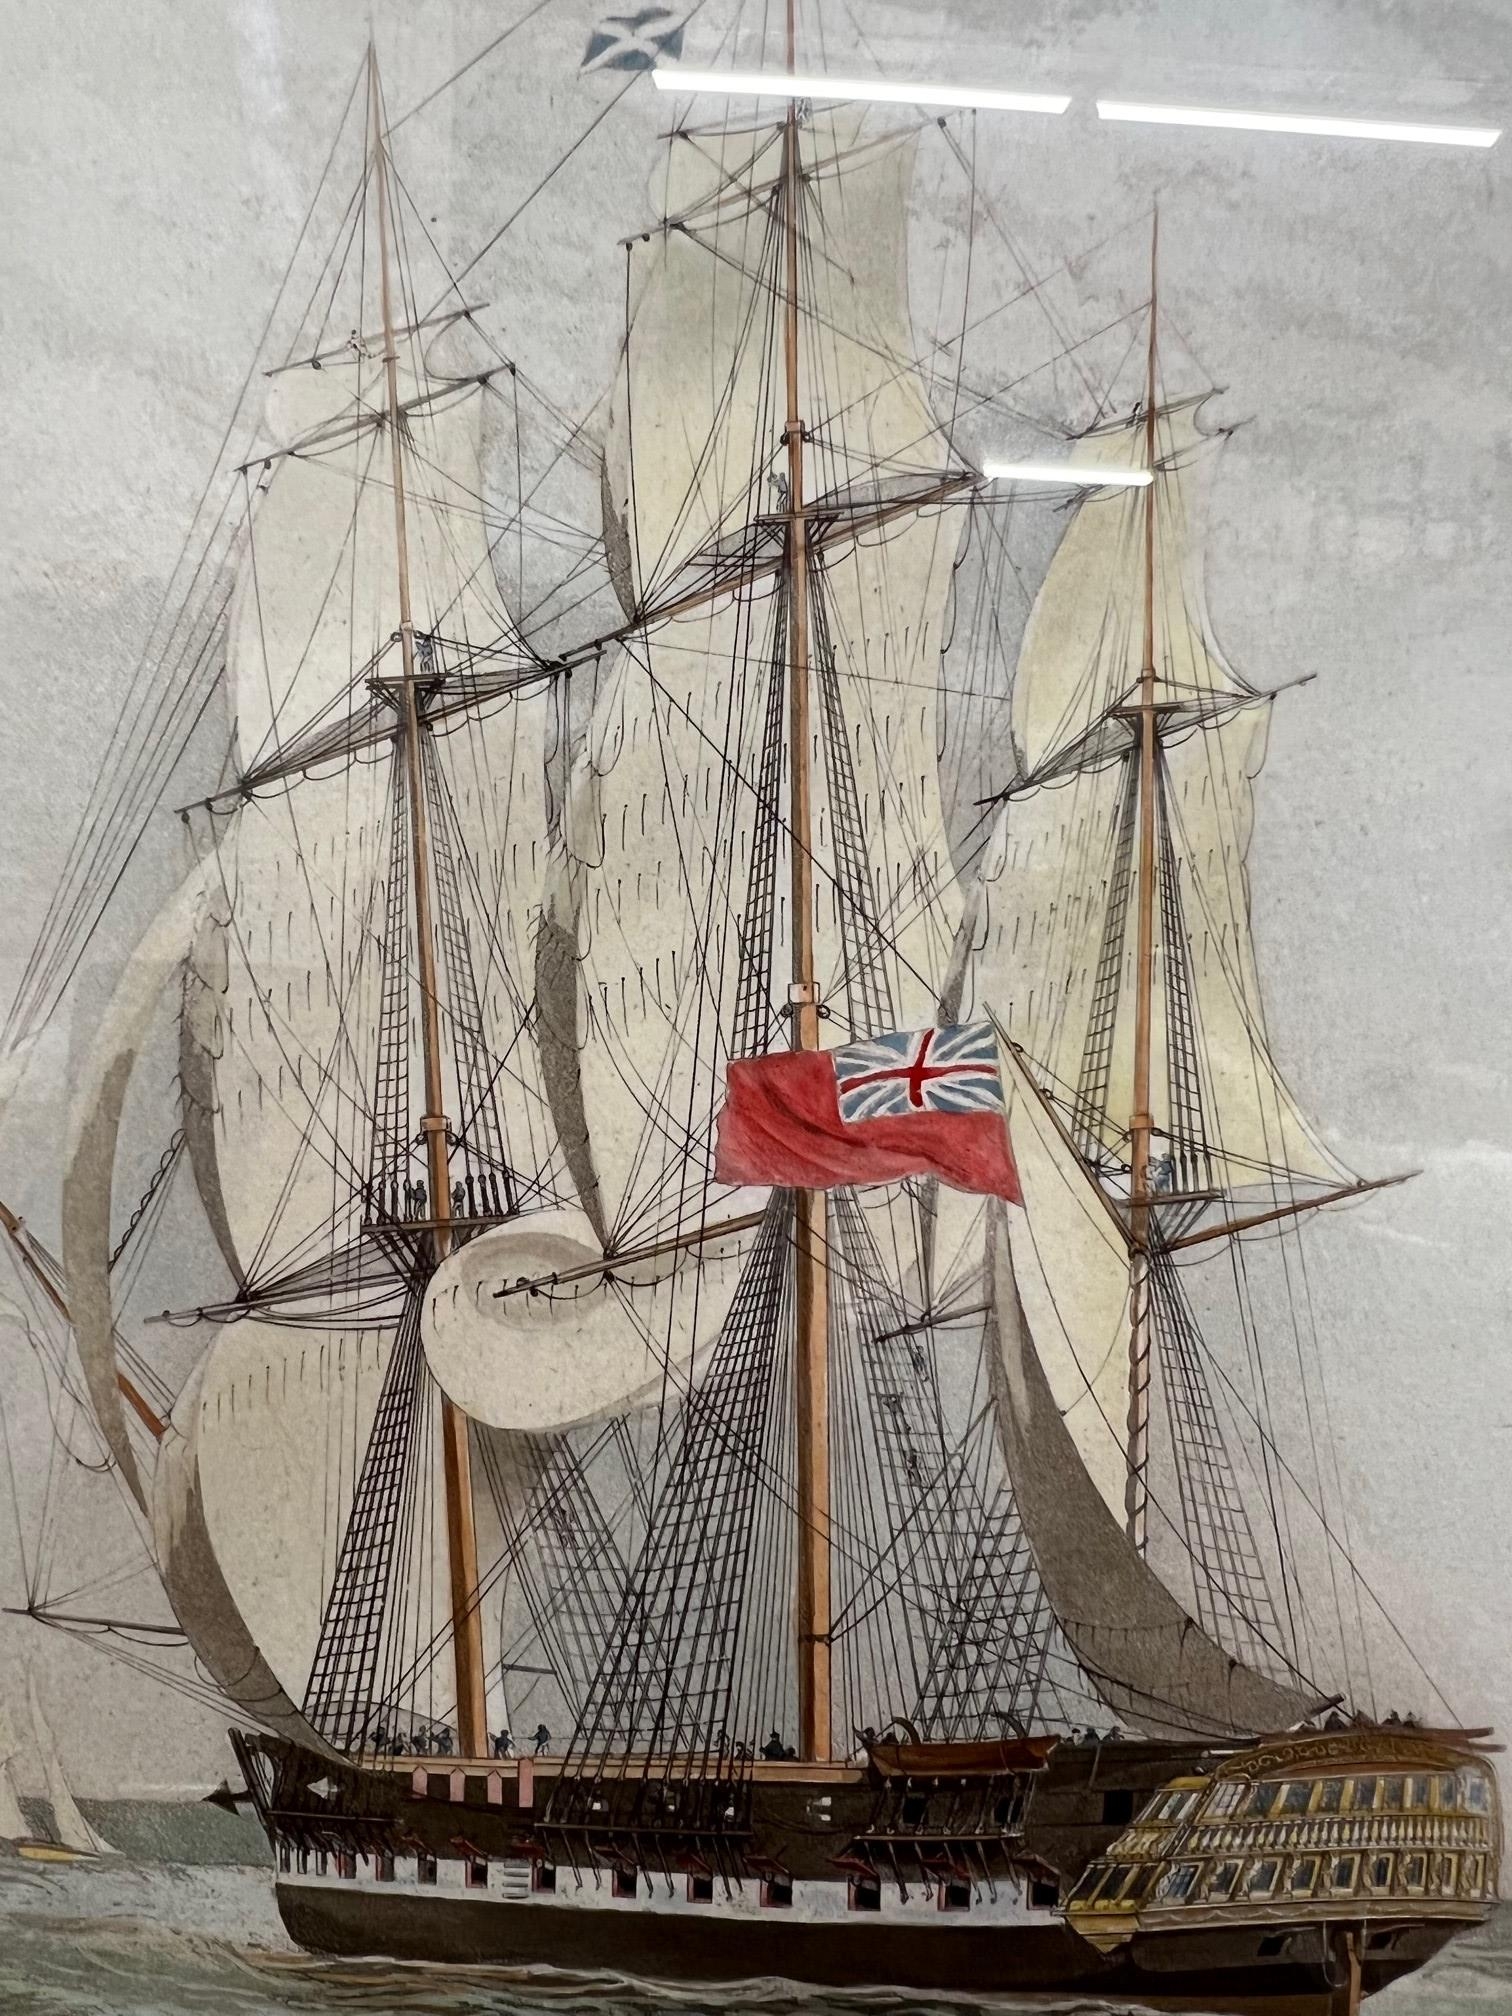 C. ROSENBERG, H.C.S. MACQUEEN OFF THE START 26TH JANUARY 1832, COLOURED ETCHING AND HAND COLOURED - Image 3 of 11